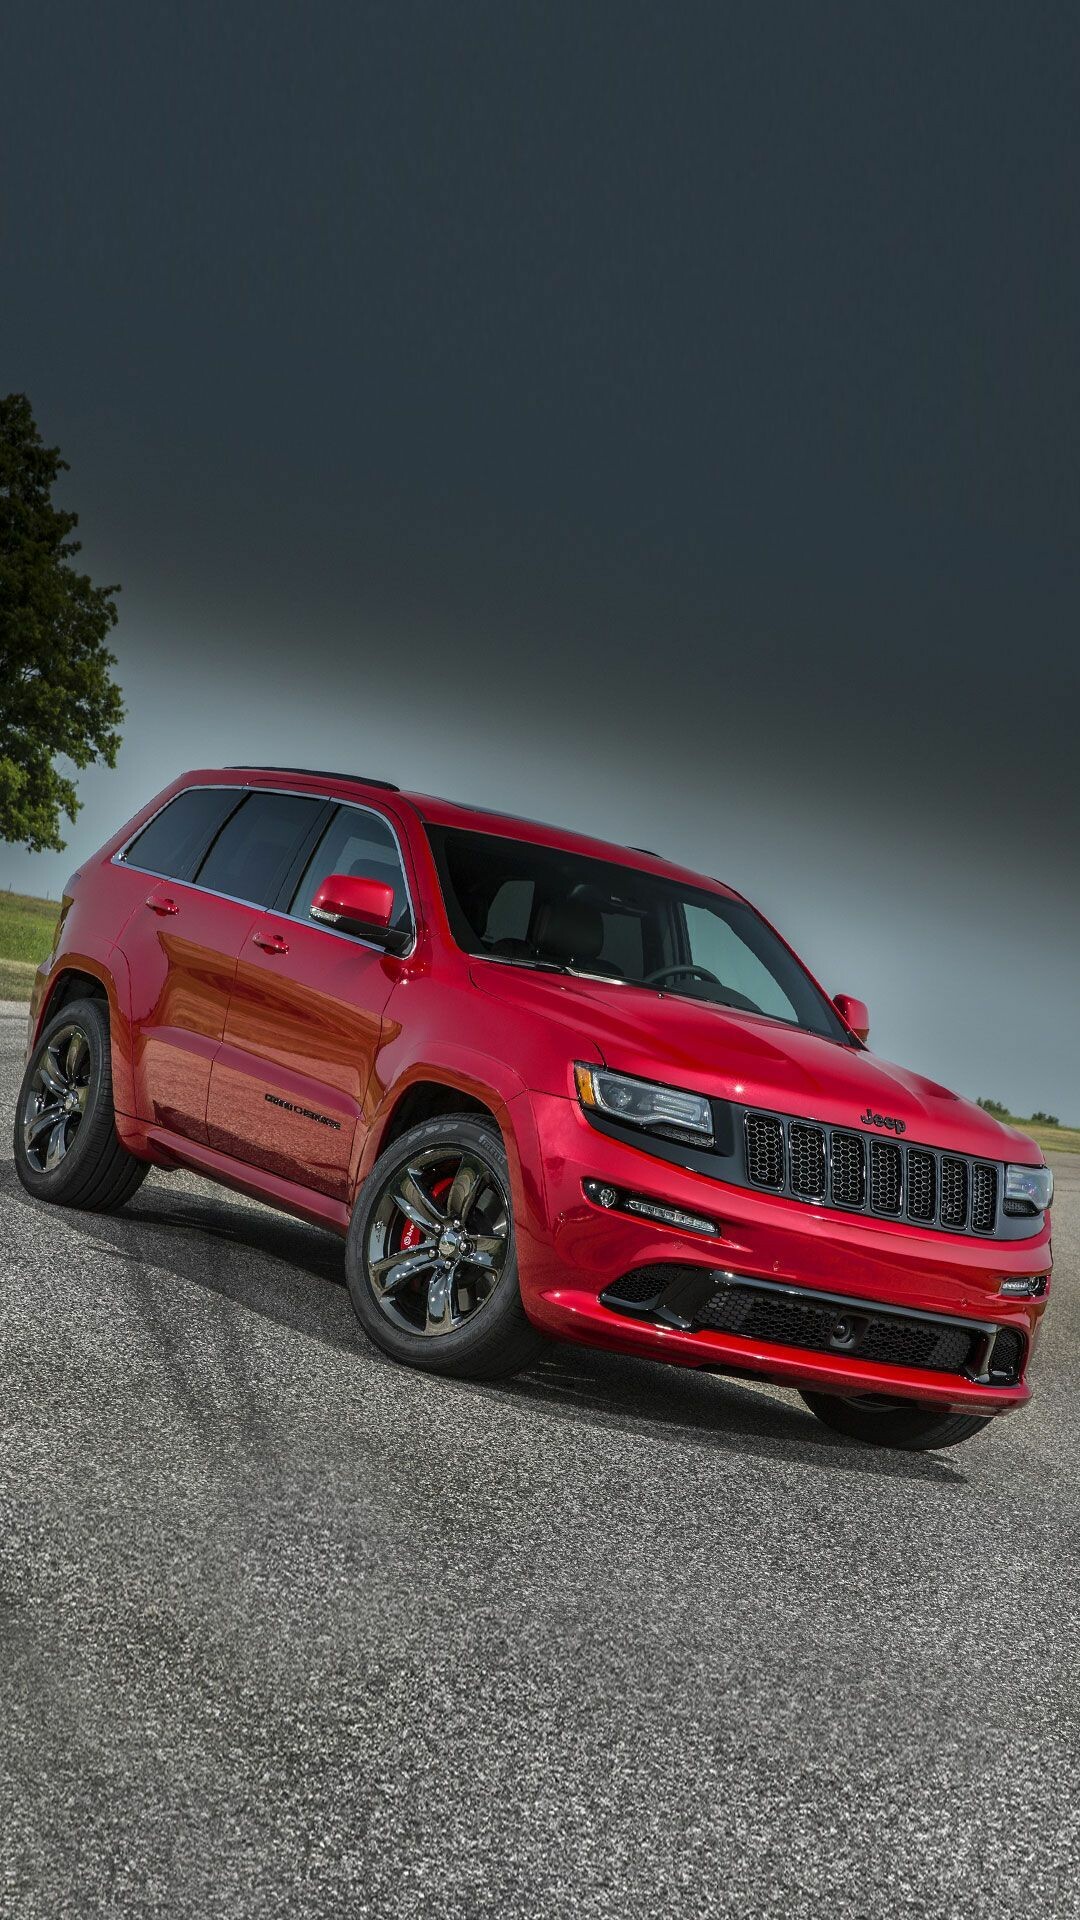 Jeep Grand Cherokee: SRT trim, Wears more aggressive bodywork and comes standard with a sport-tuned suspension and upgraded brakes. 1080x1920 Full HD Background.